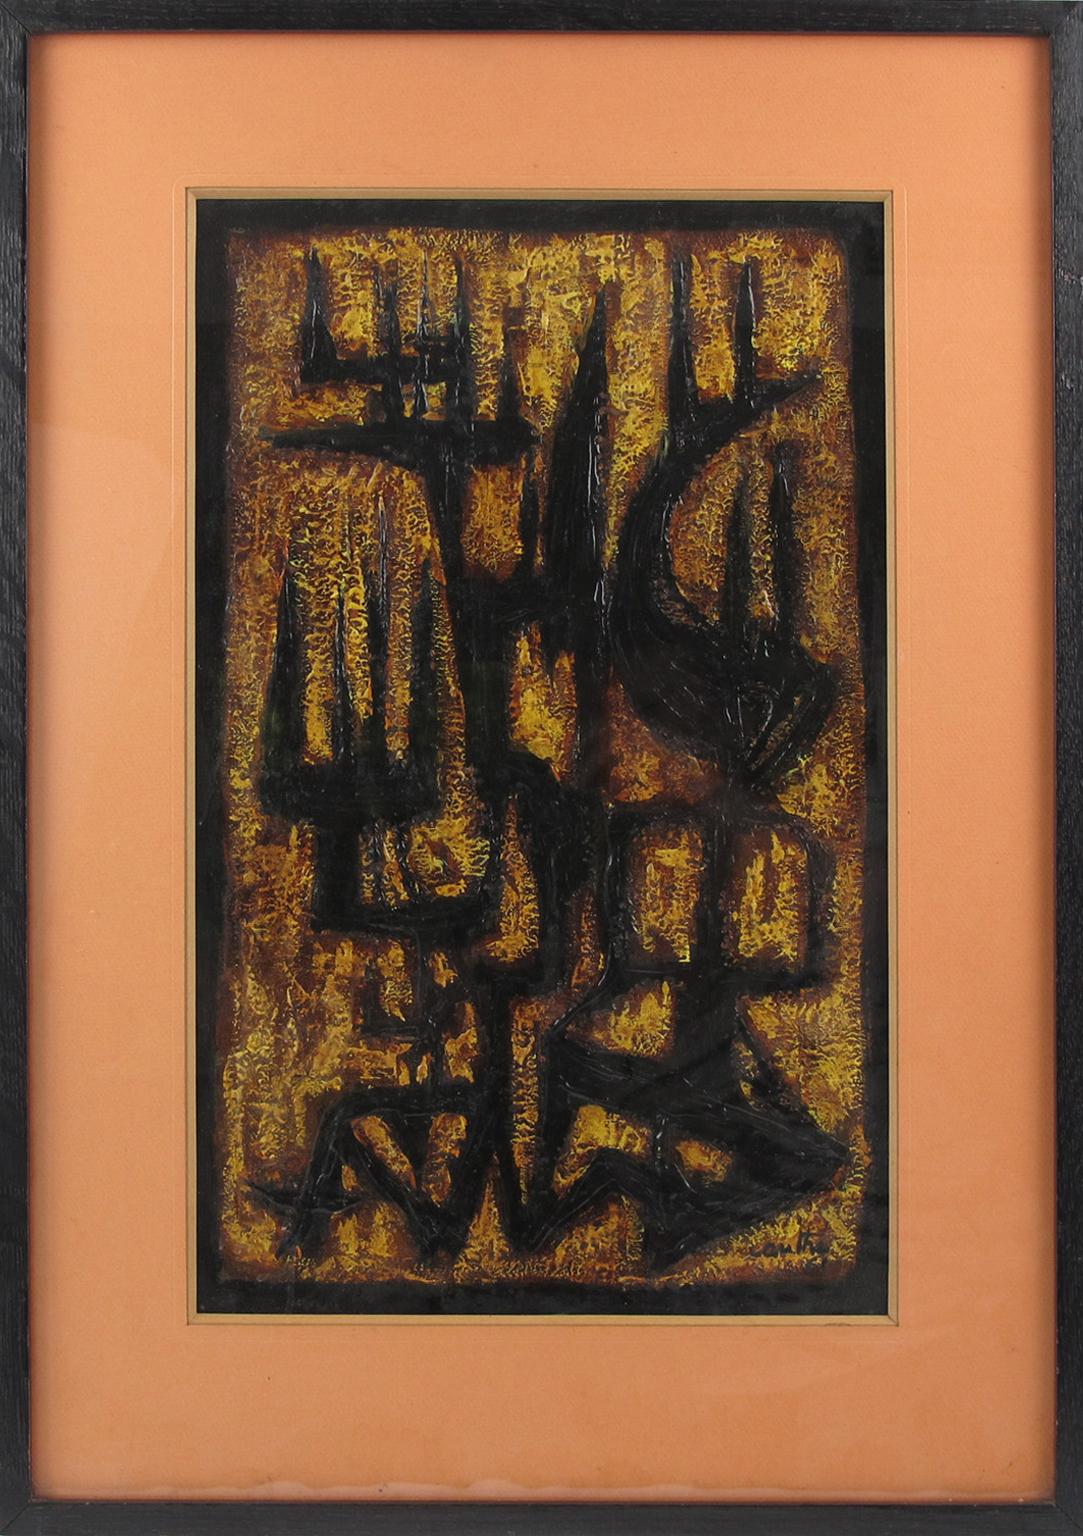 This Mid-Century modernist mix-media abstract composition is signed by American artist Canthi and dated 1961. 
The brutalist design in black and brown colors contrasts with the yellow and orange tones of the background. The composition is ornate